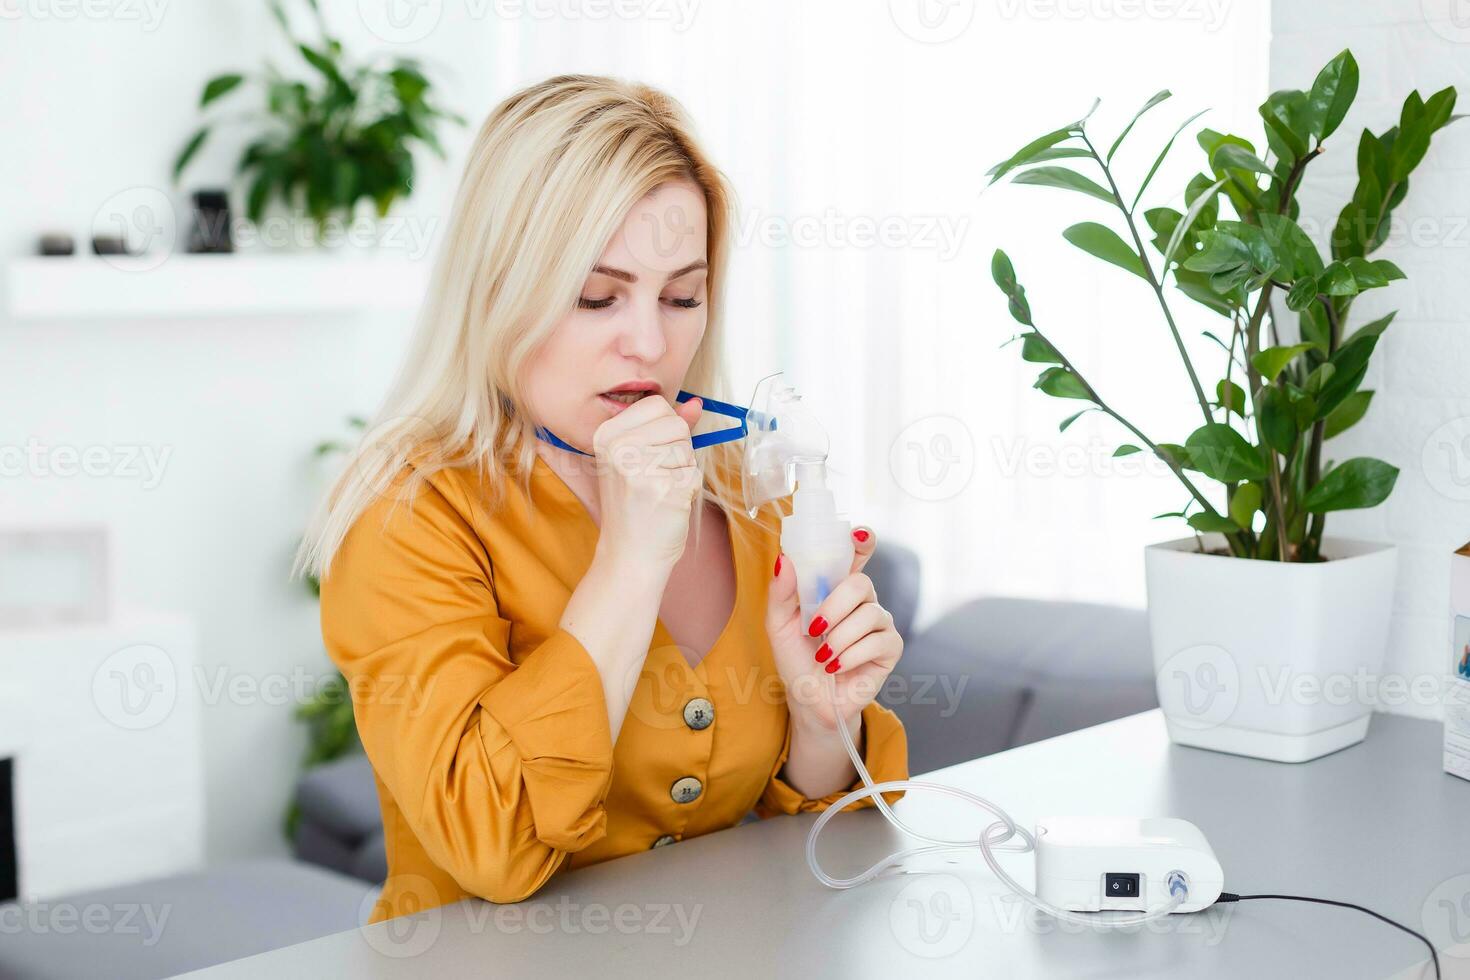 woman makes inhalation nebulizer at home. holding a mask nebulizer inhaling fumes spray the medication into your lungs sick patient. self-treatment of the respiratory tract using inhalation nebulizer photo